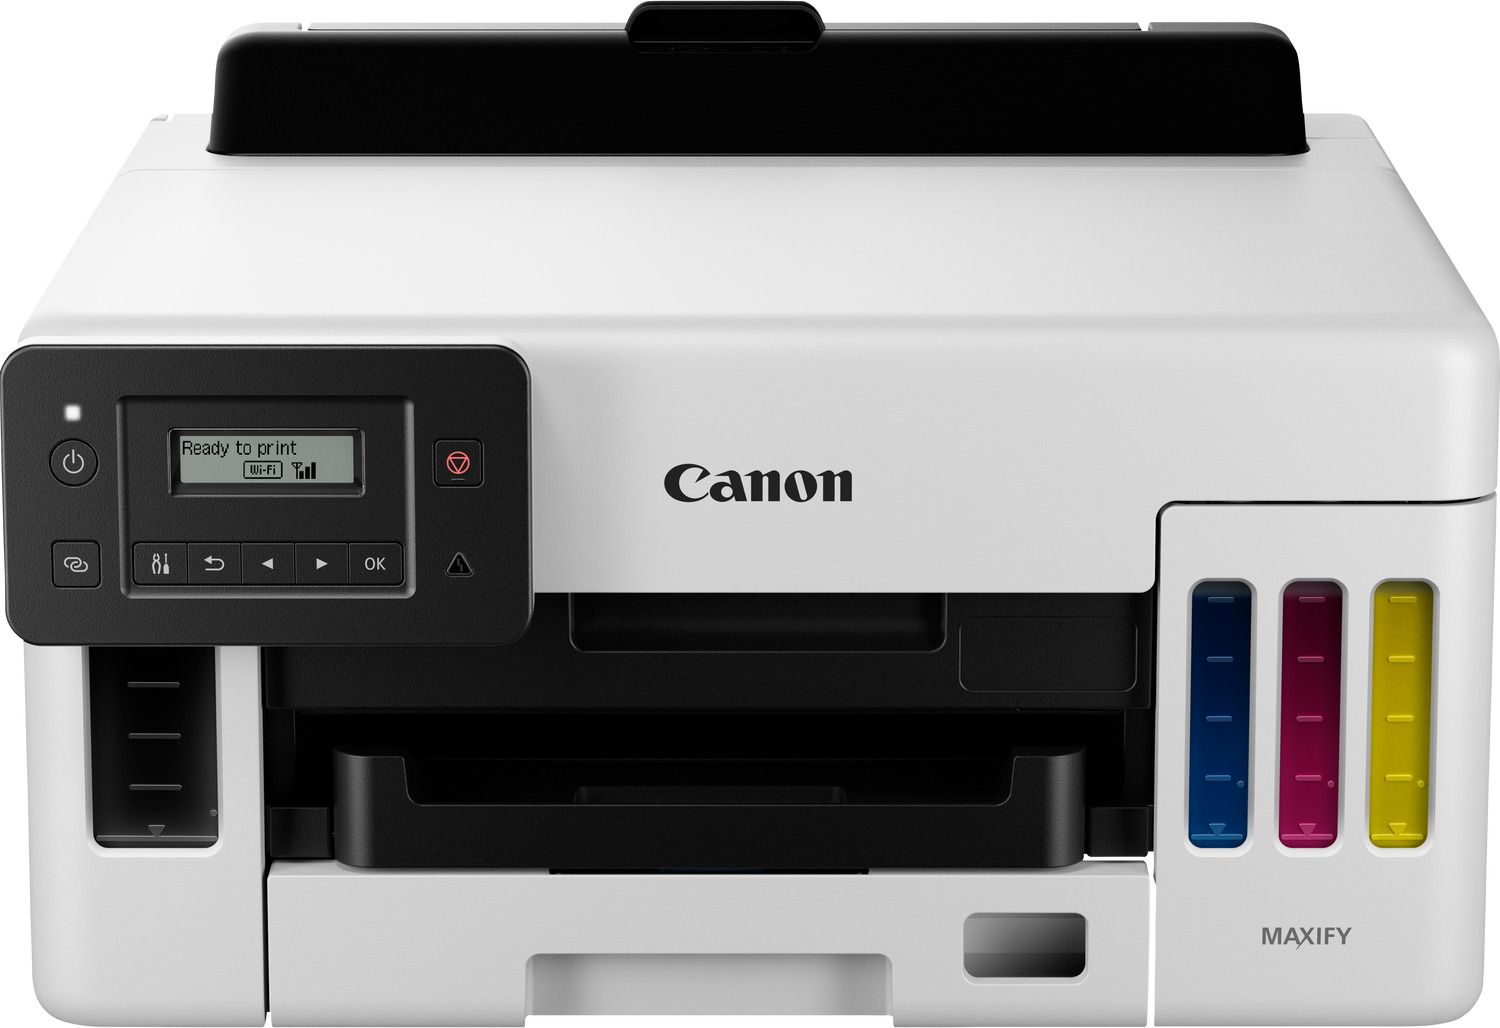 CANON MAXIFY GX5050 Single Function Refillable Ink Tank Printer Wi-Fi/Ethernet Black 24.0ipm Colour 15.5ipm